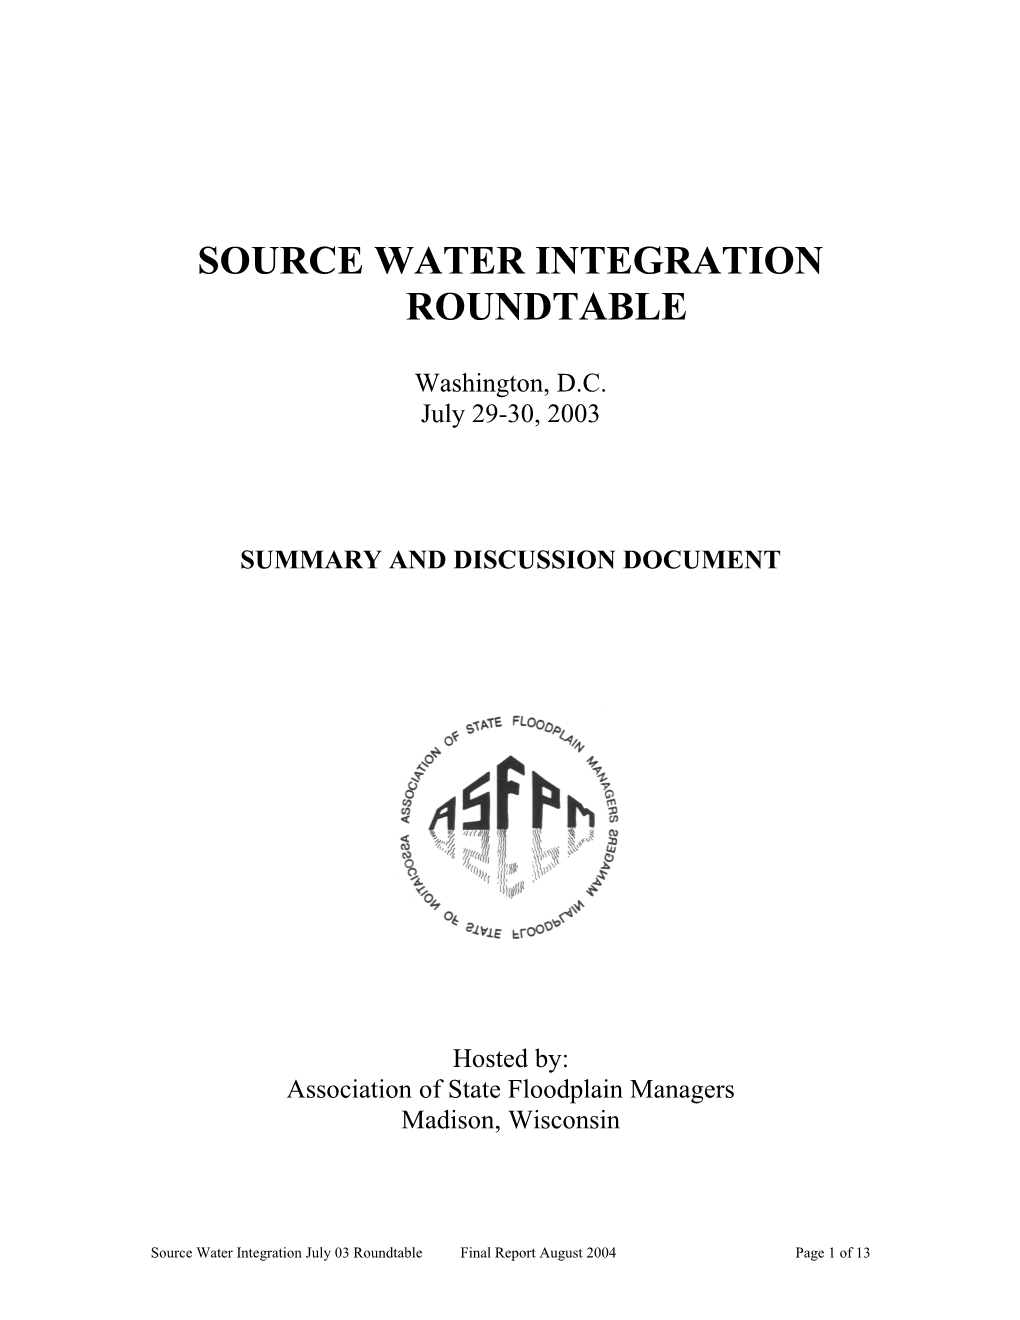 Source Water Integration Roundtable